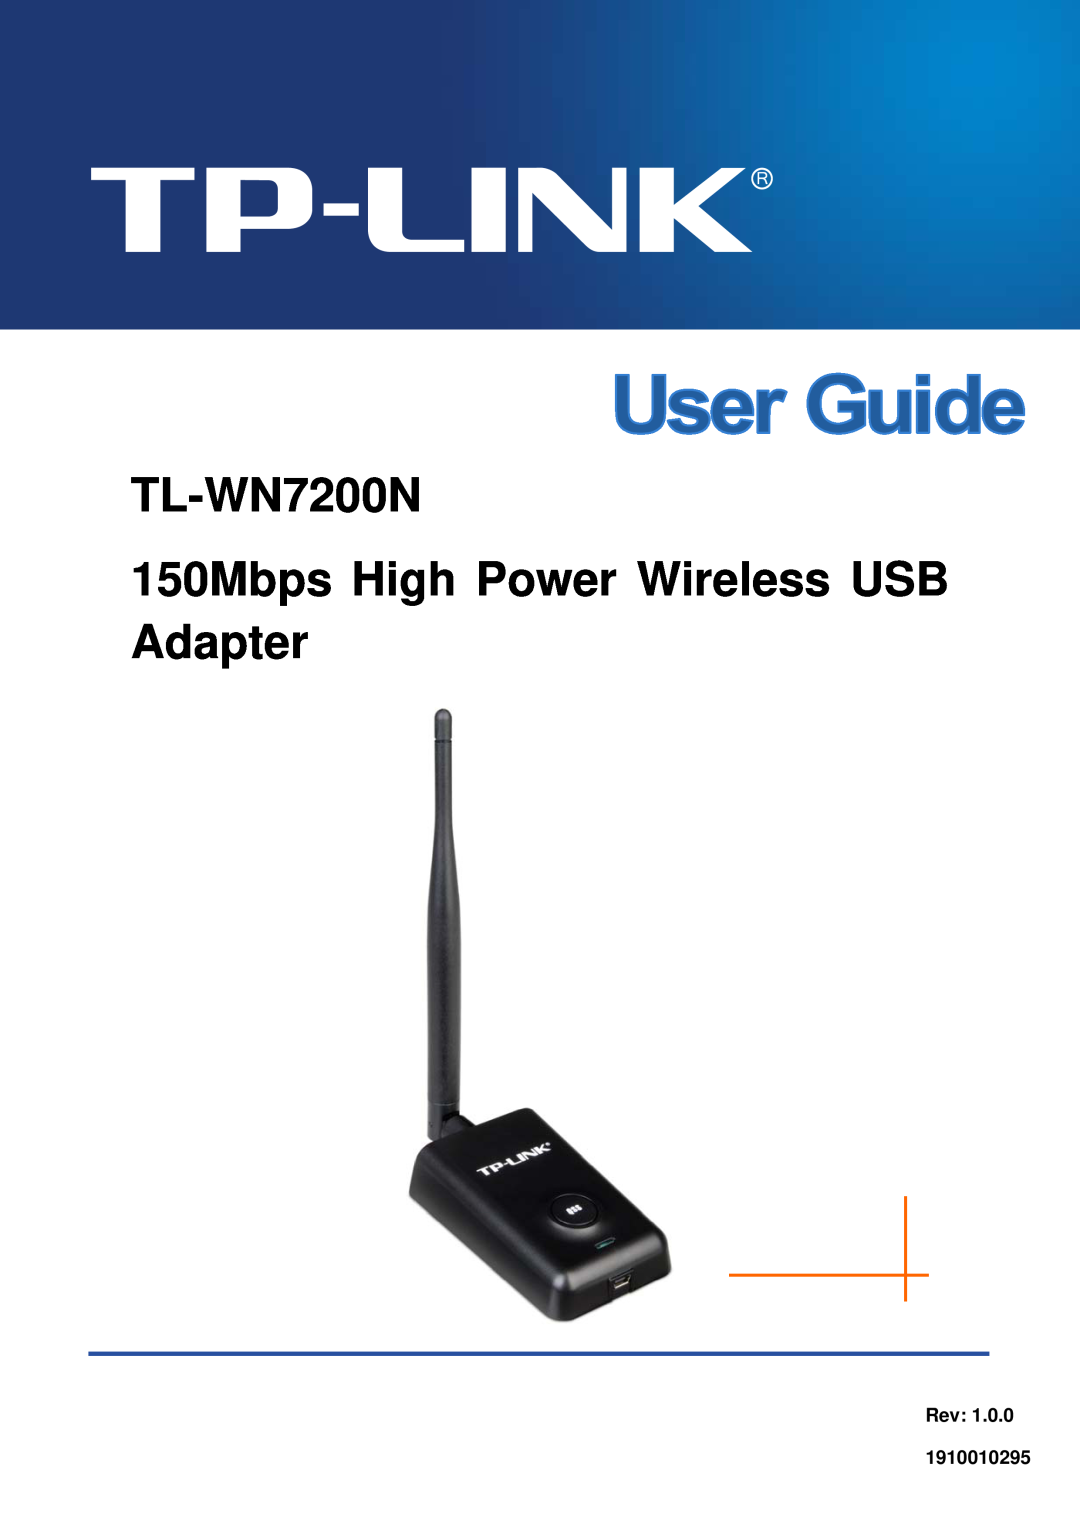 TP-Link manual TL-WN7200N 150Mbps High Power Wireless USB Adapter, Rev 1910010295 